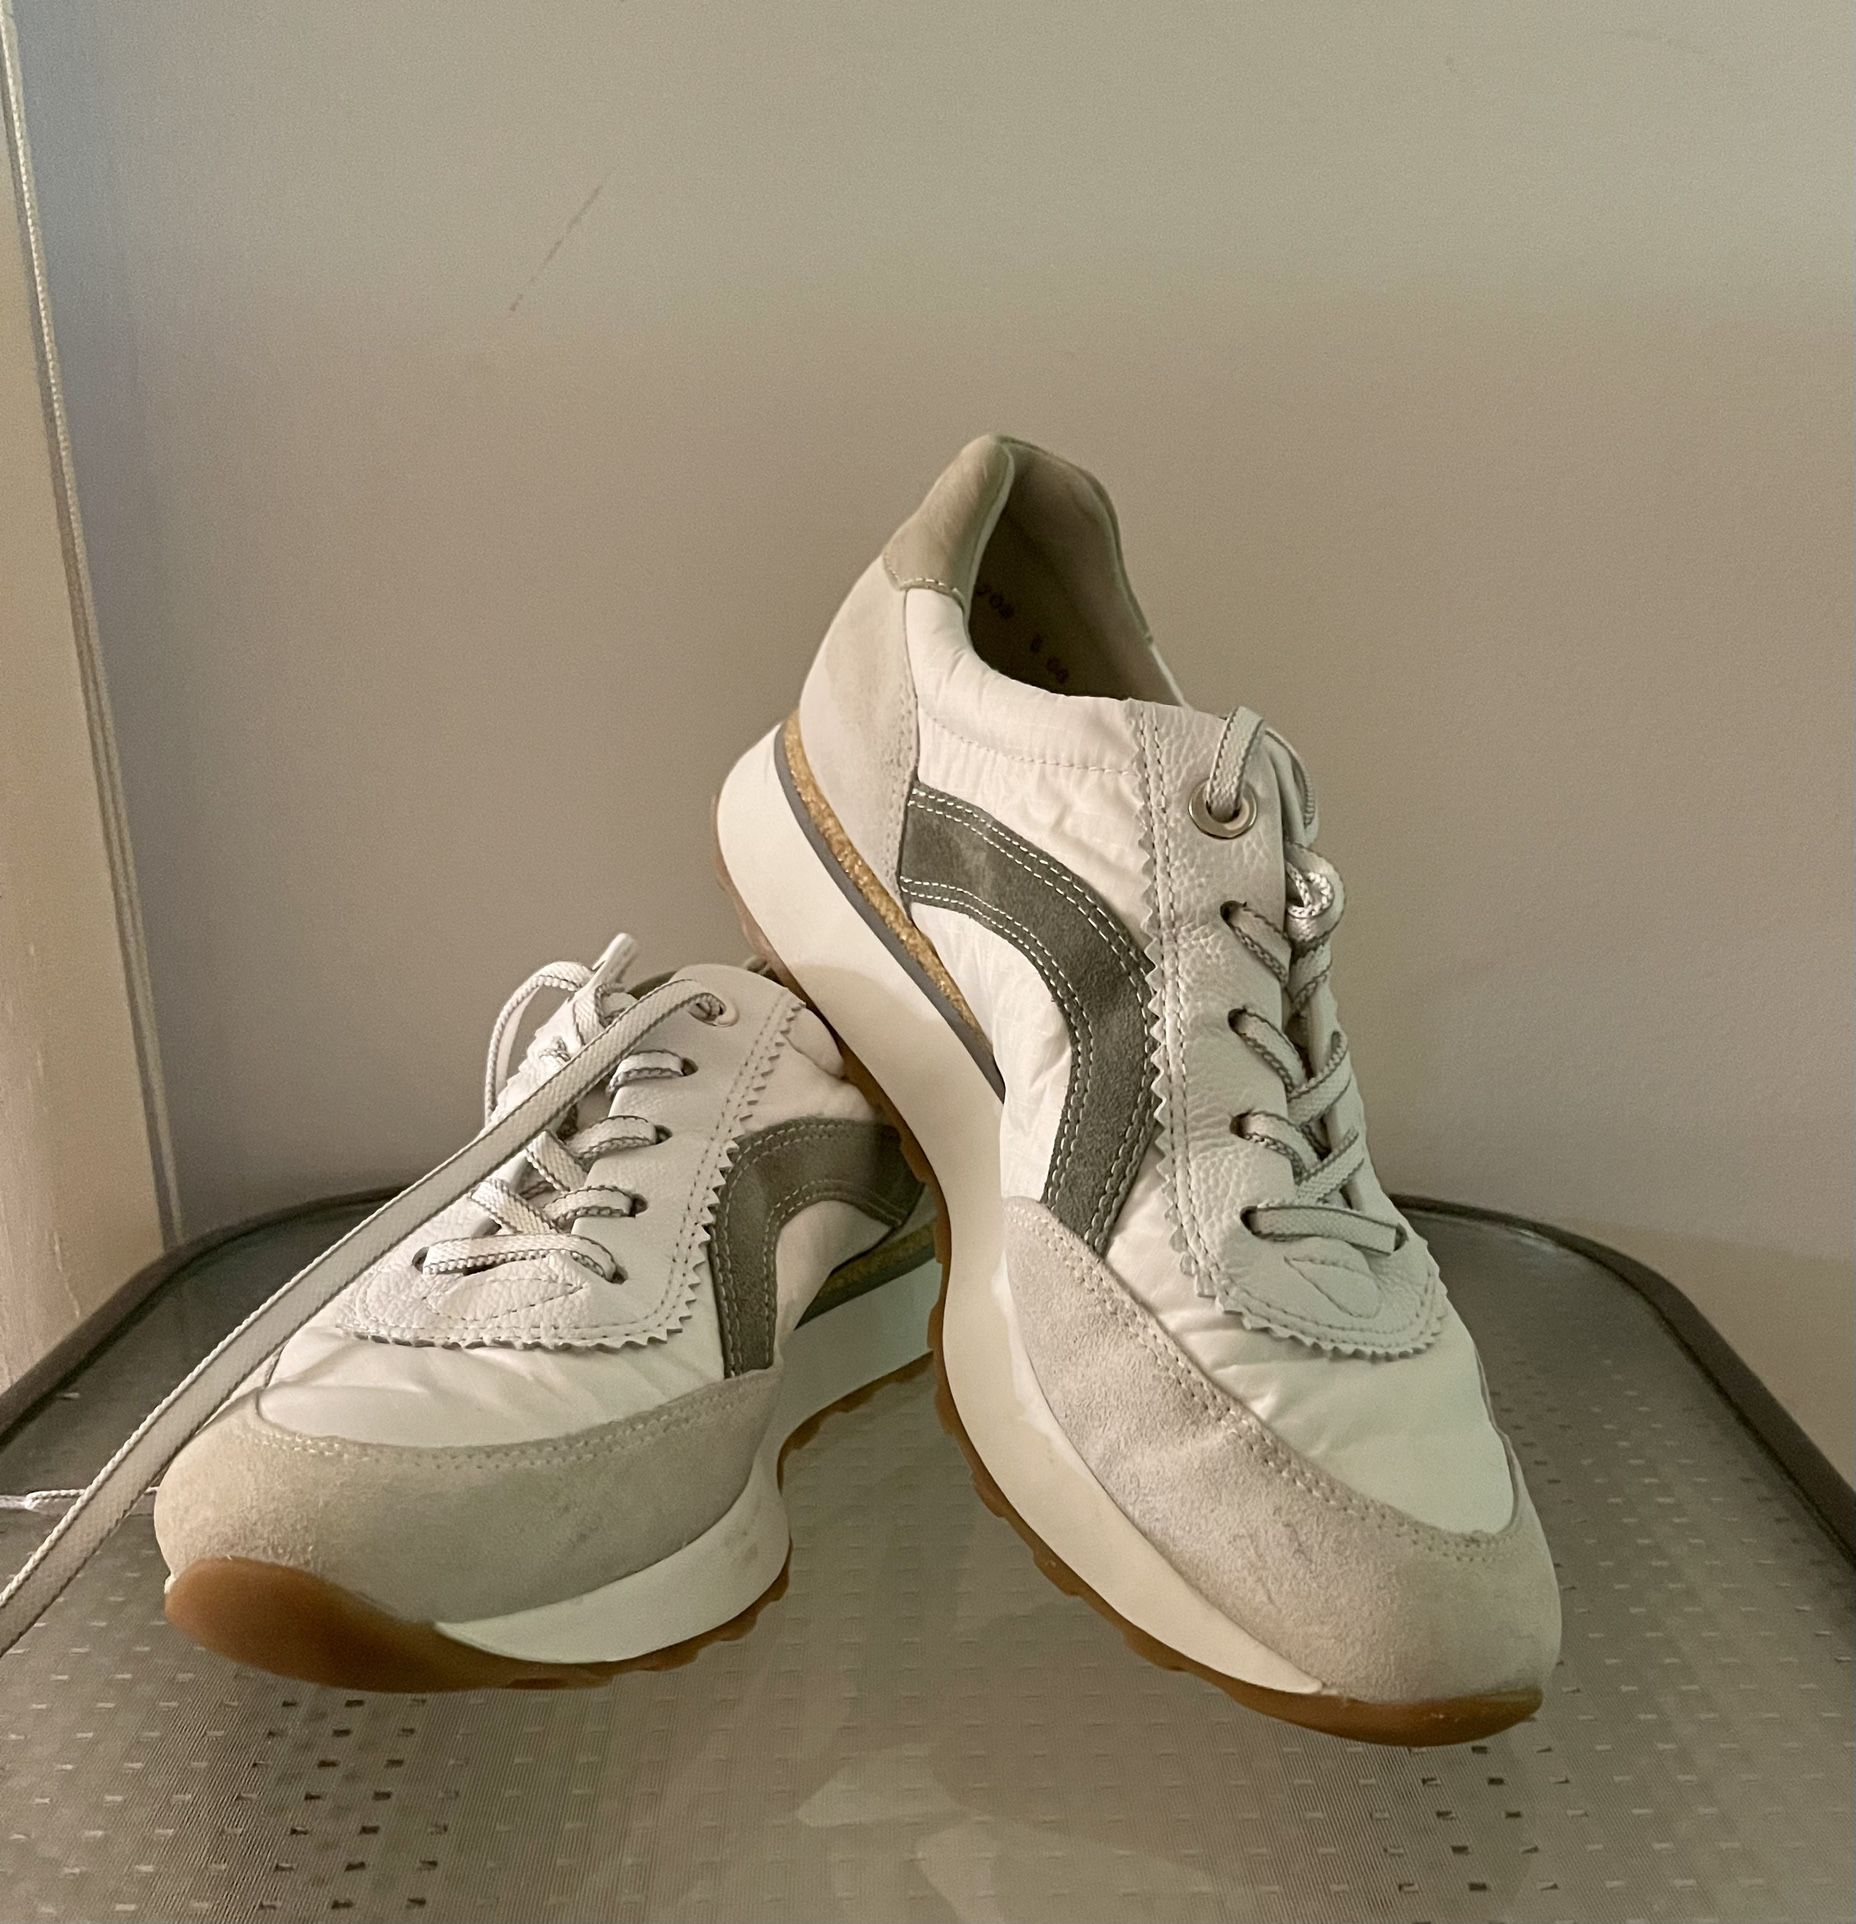 Paul Green Brier White Sneakers, Size 9.5